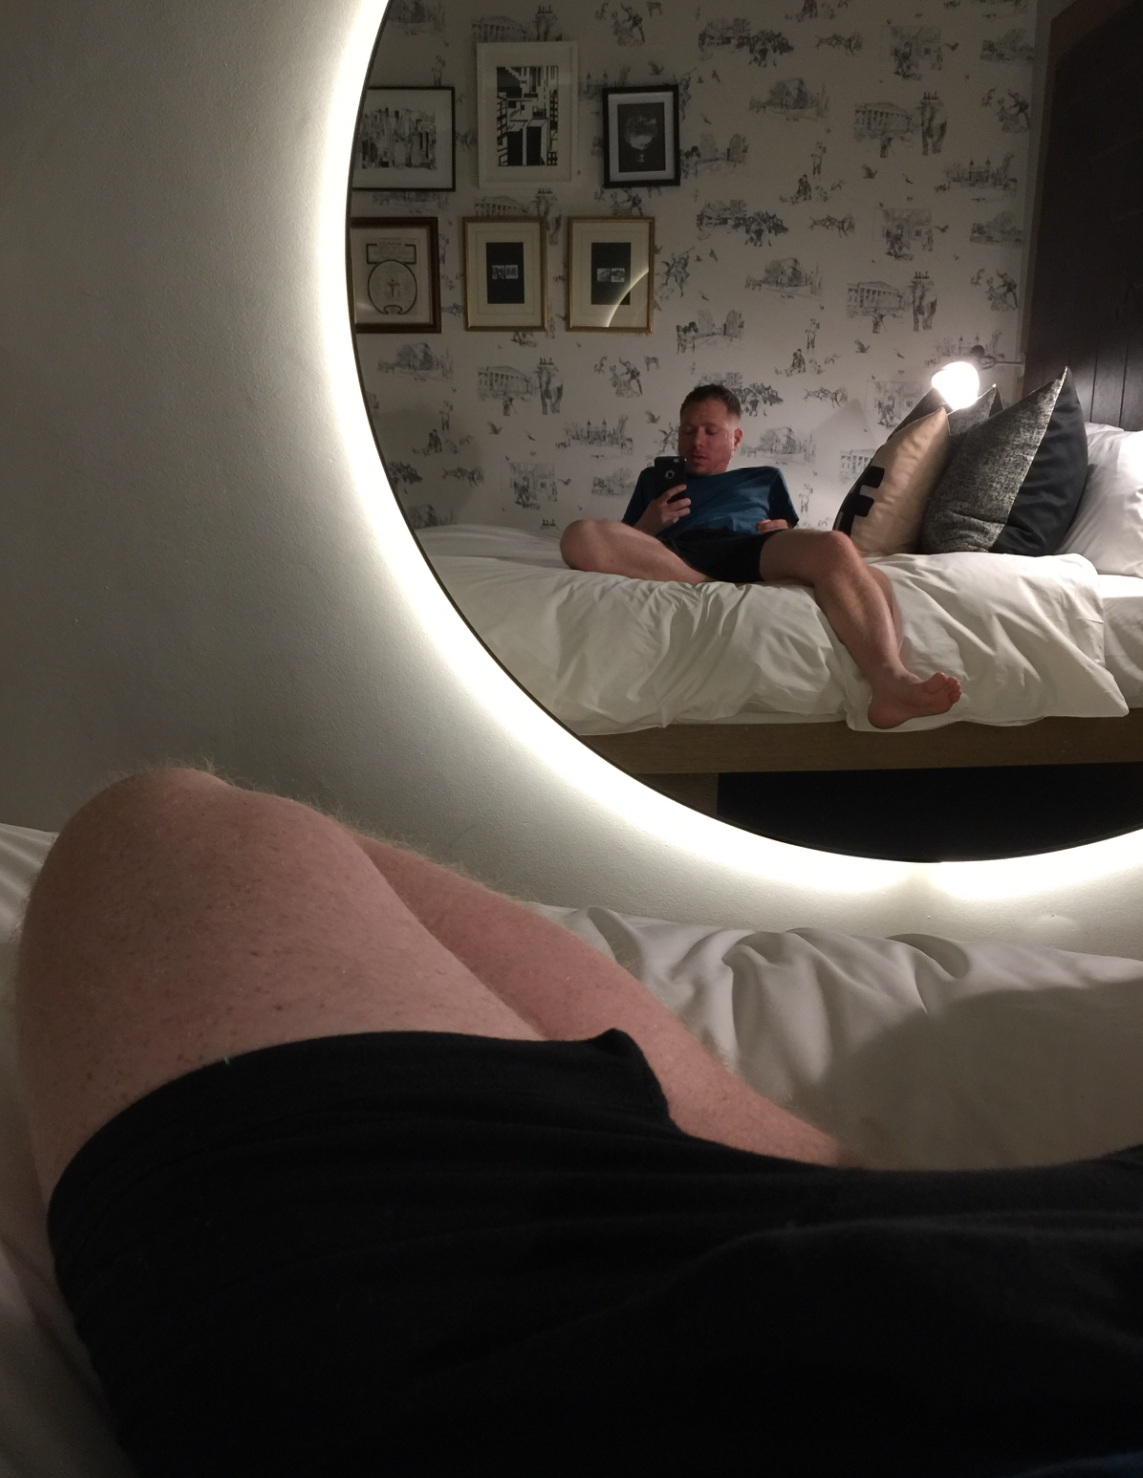 mirror selfie in a sexy hotel room